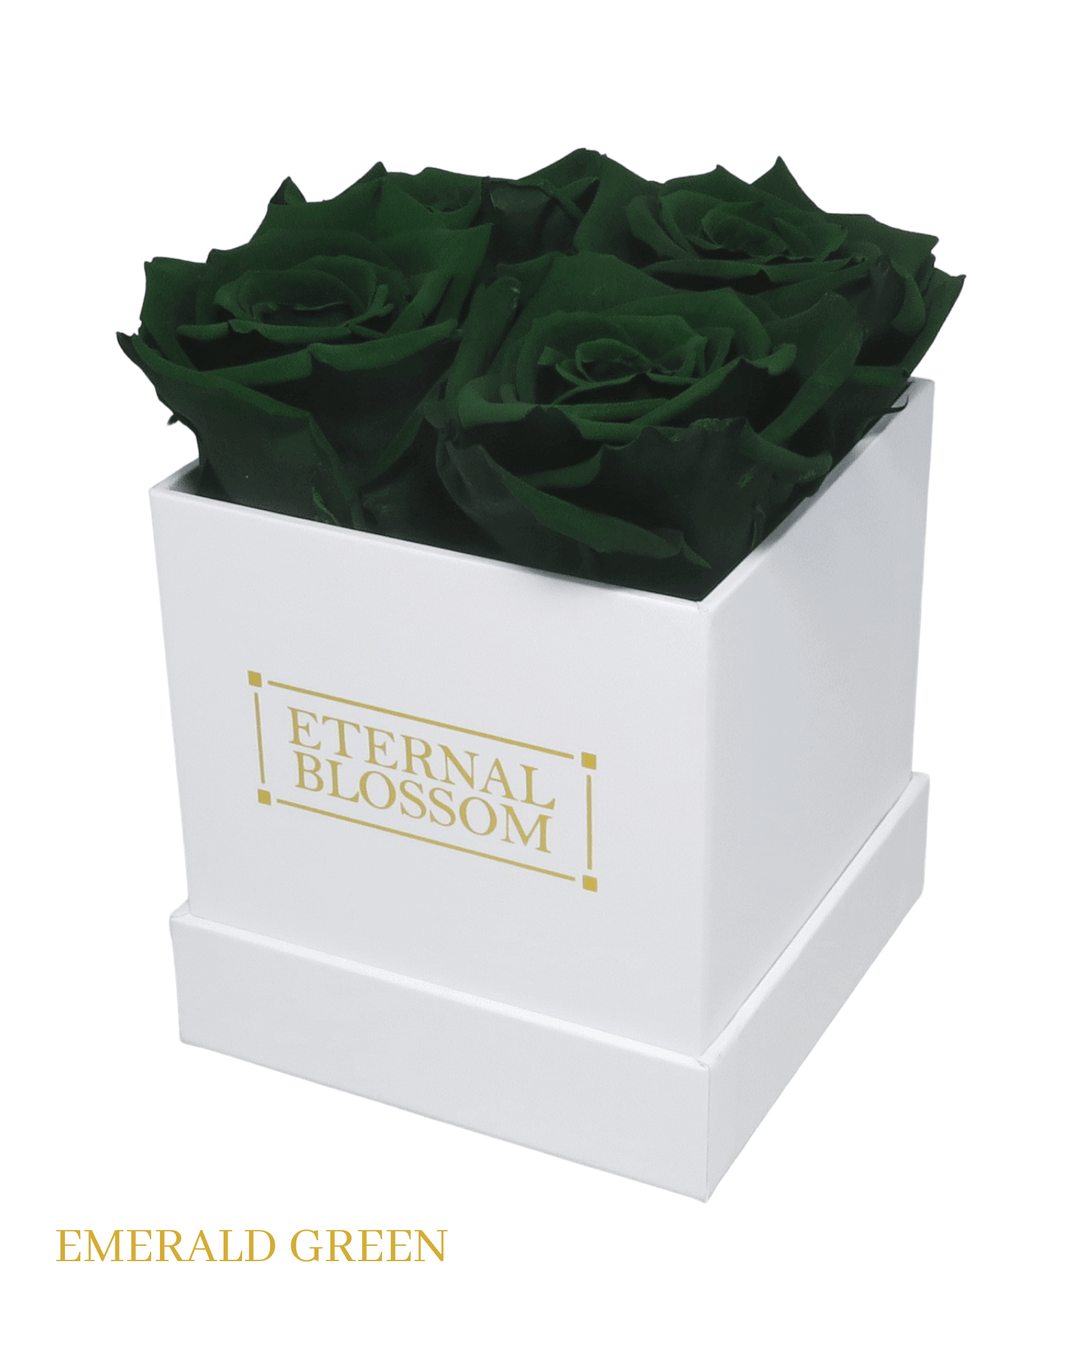 4 Piece Blossom Box - White Box - All Colours of Year Lasting Infinity Roses - Eternal Blossom